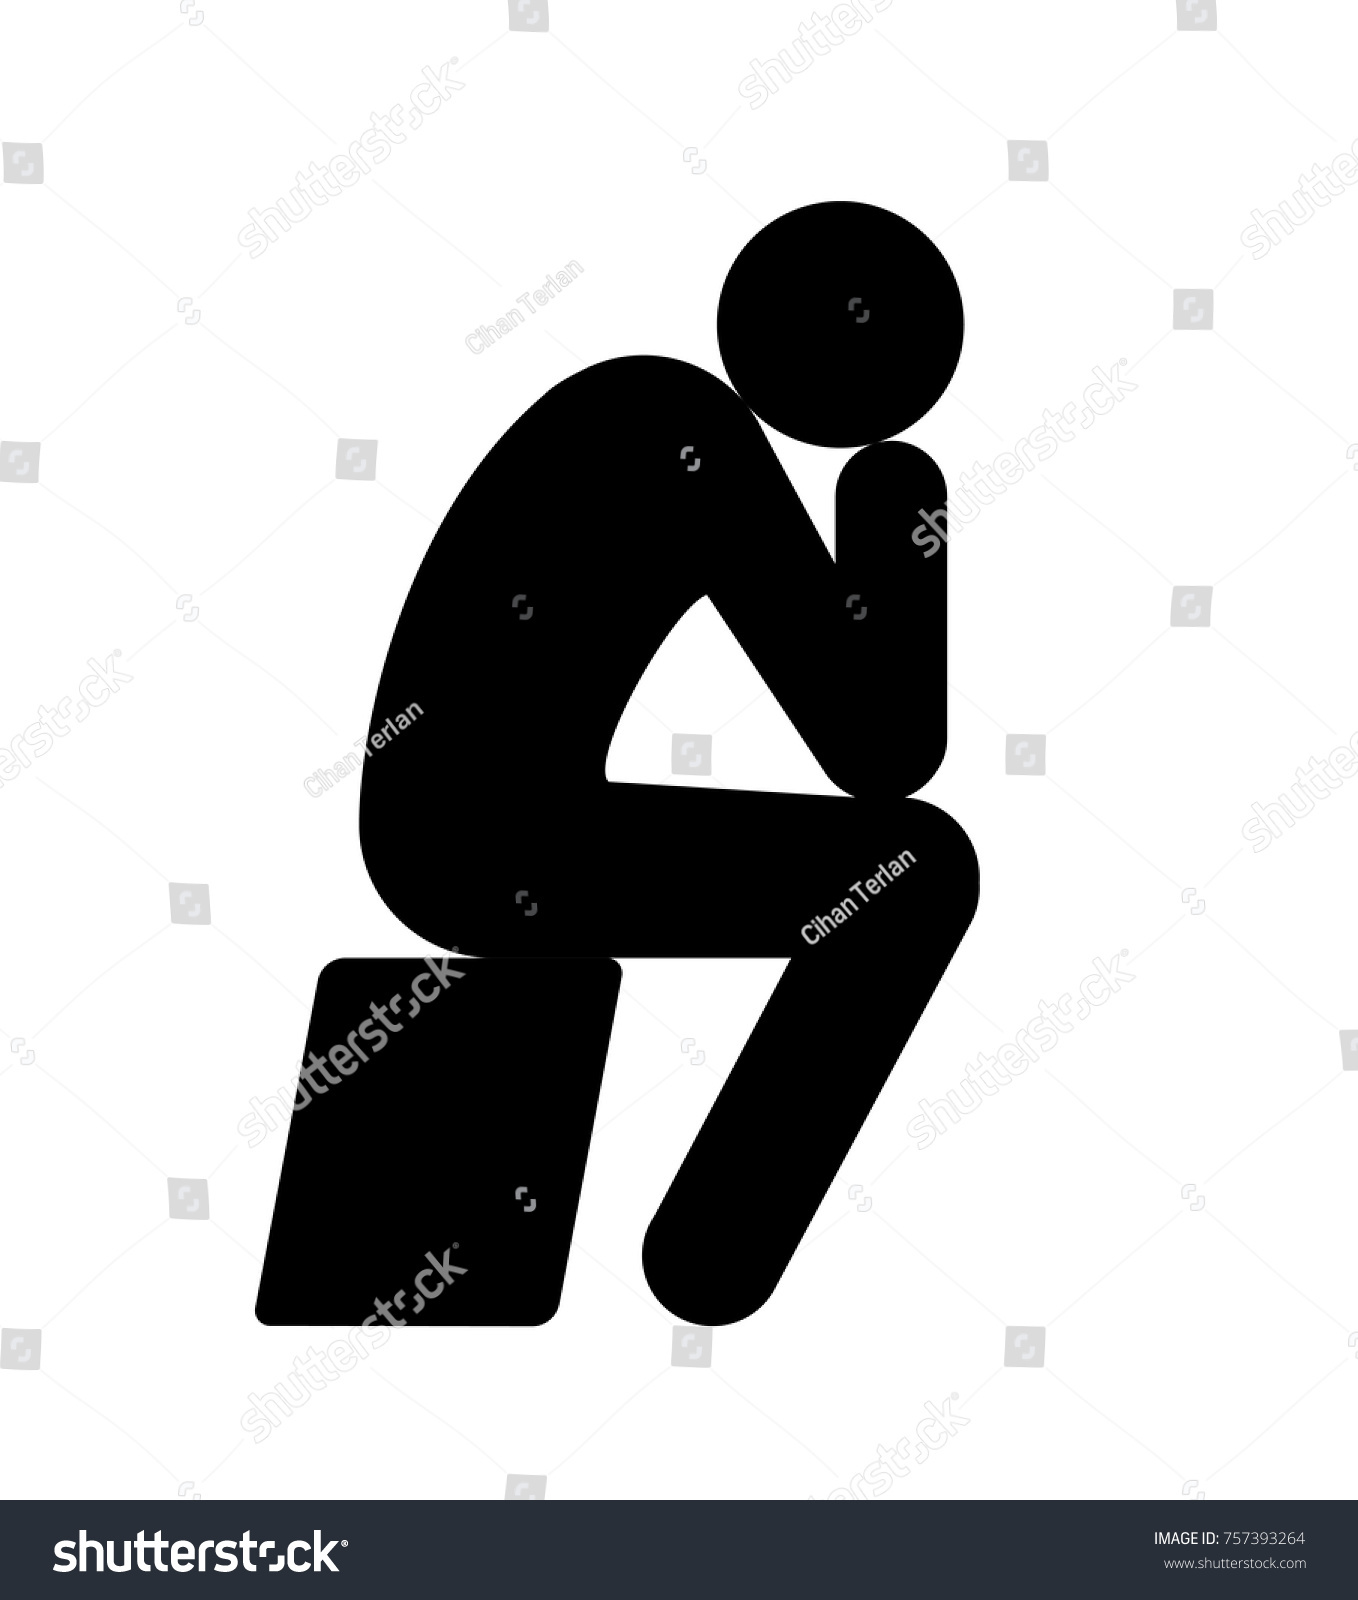 21,056 Thinking man pictogram Images, Stock Photos & Vectors | Shutterstock